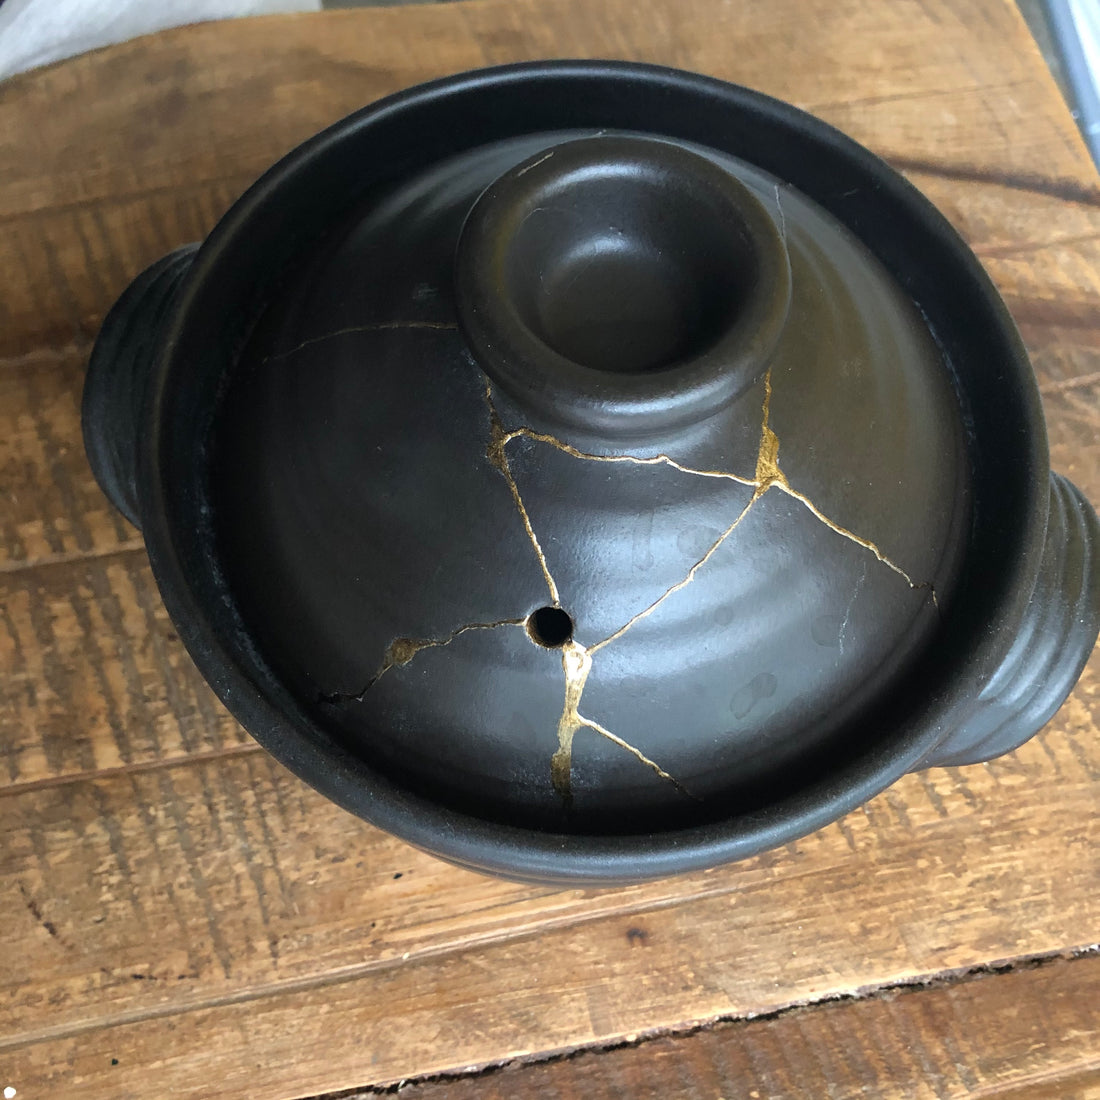 Kintsugi (金継ぎ）- The Art of Fixing Broken Pottery and Reuse